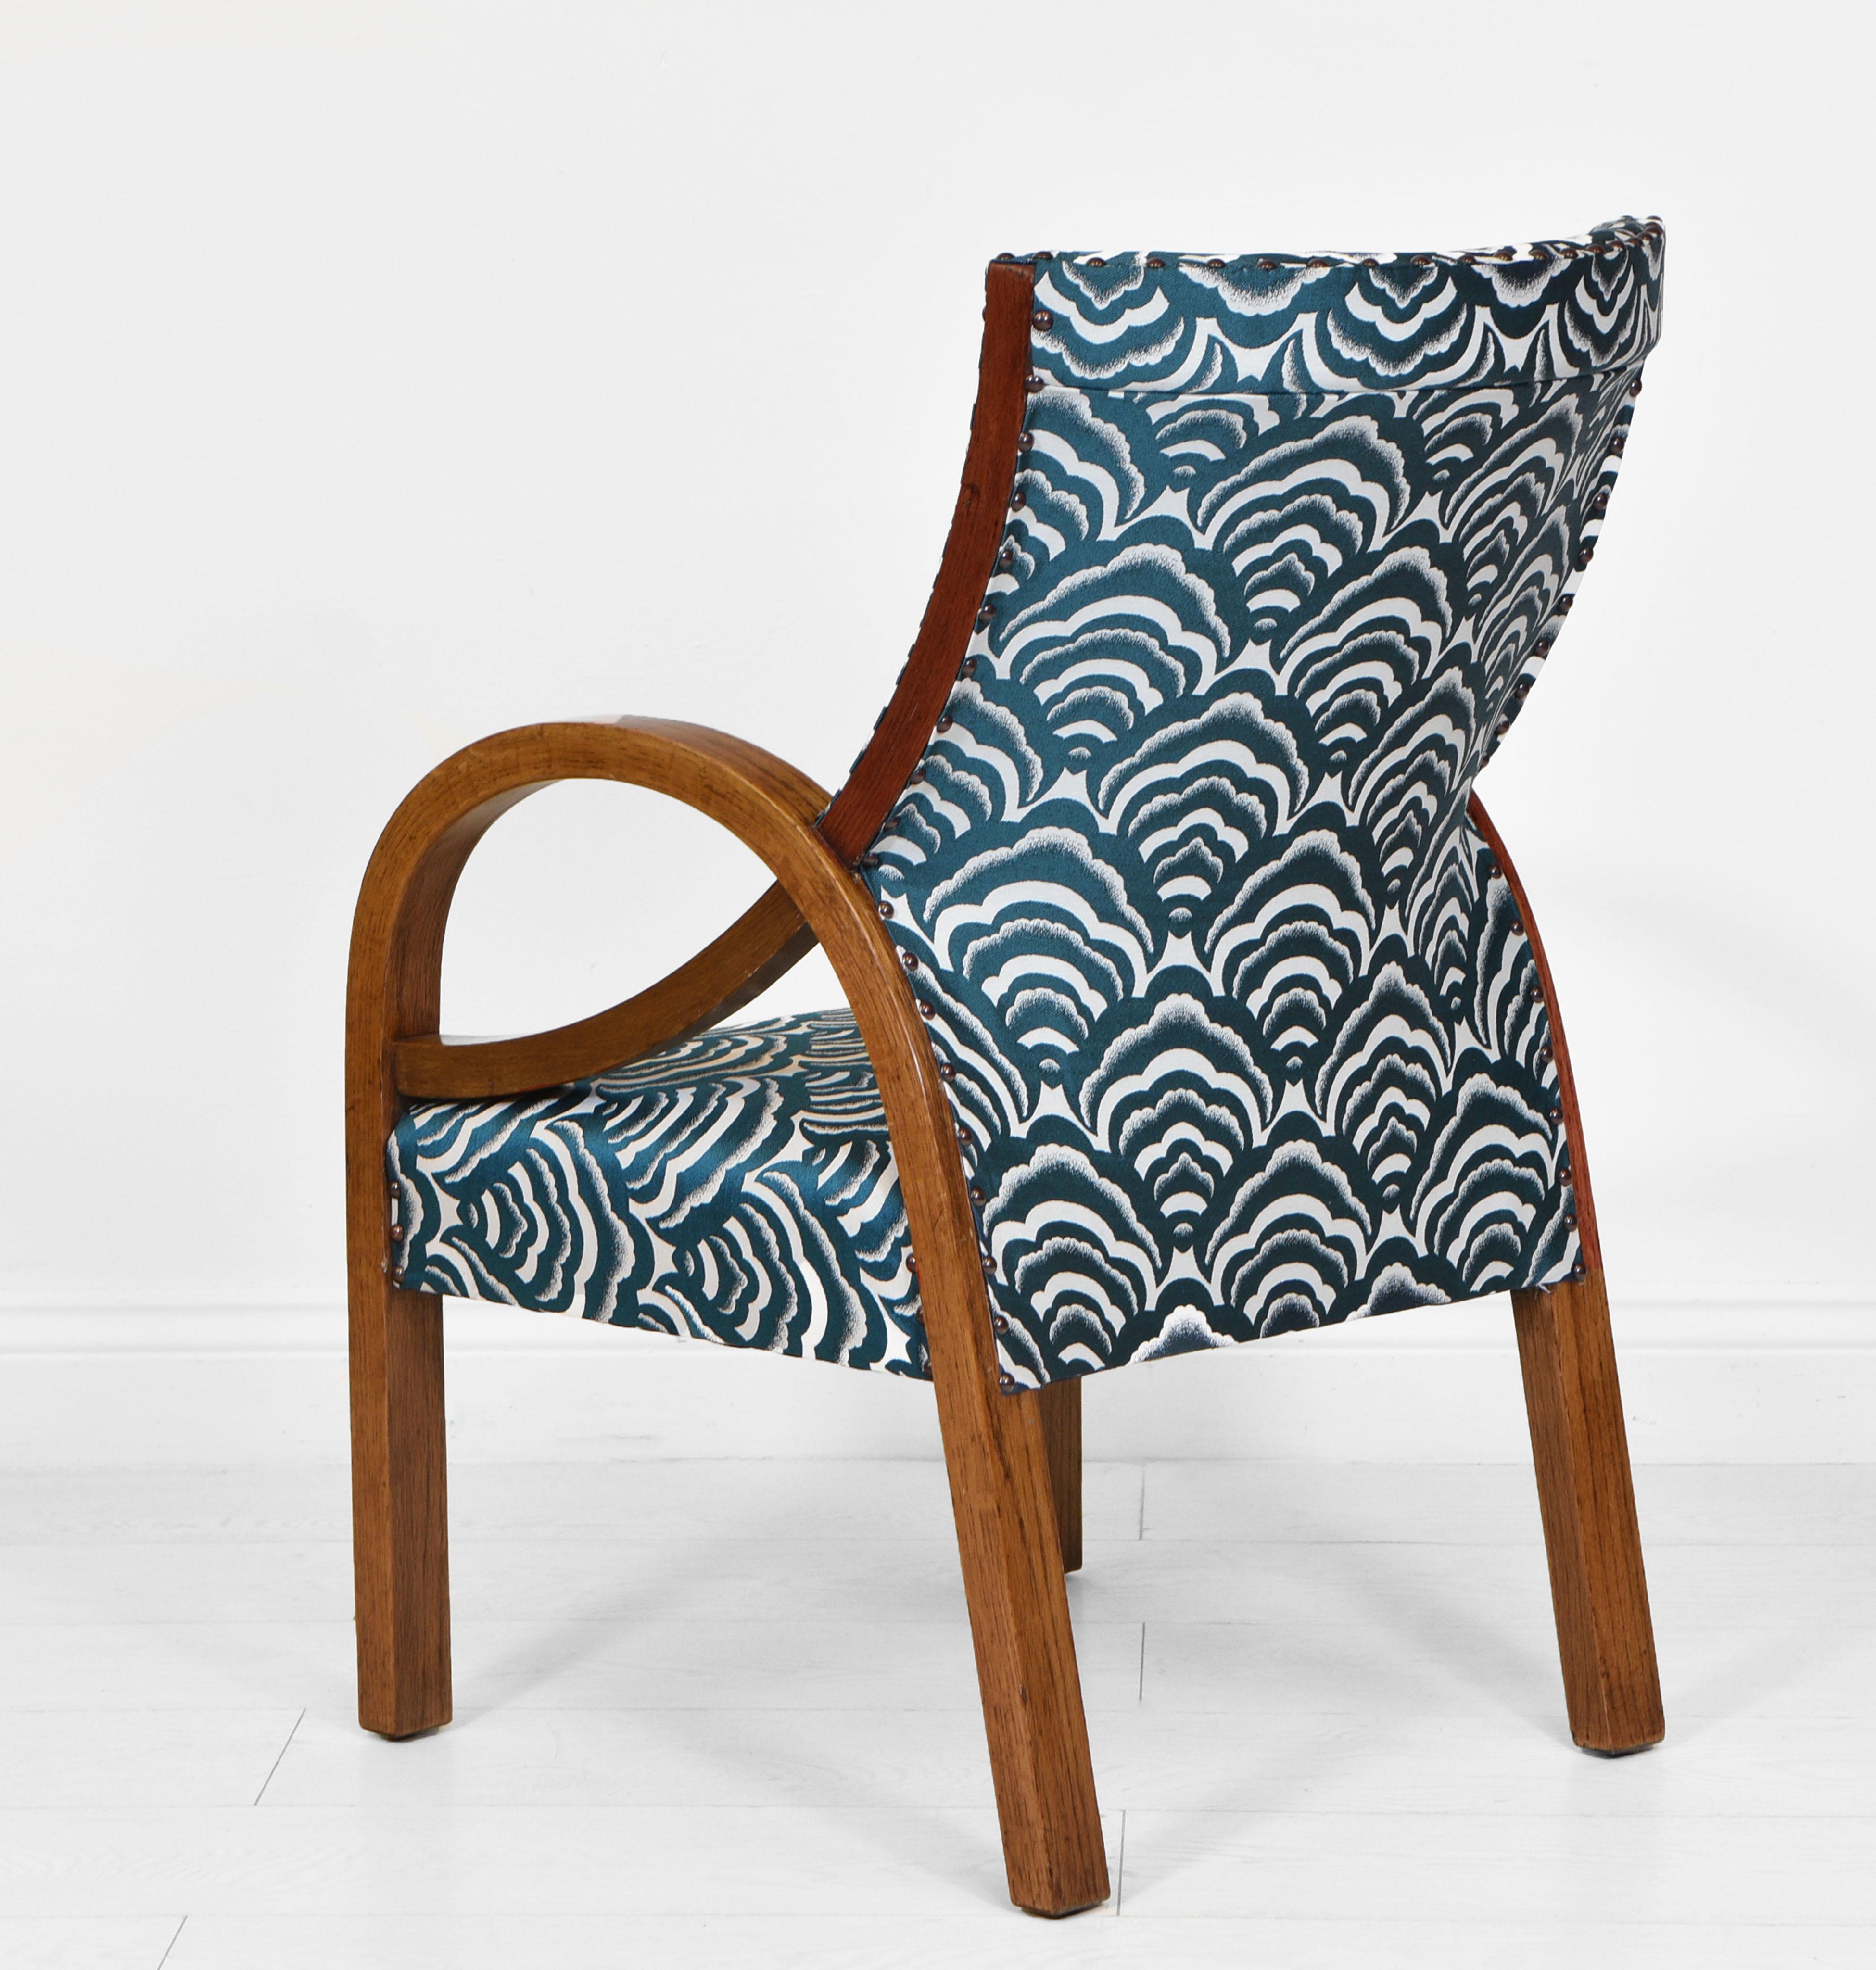 Art Deco Bent Oak Small Armchair Upholstered in a Teal Cloud Form Fabric In Good Condition For Sale In Norwich, GB